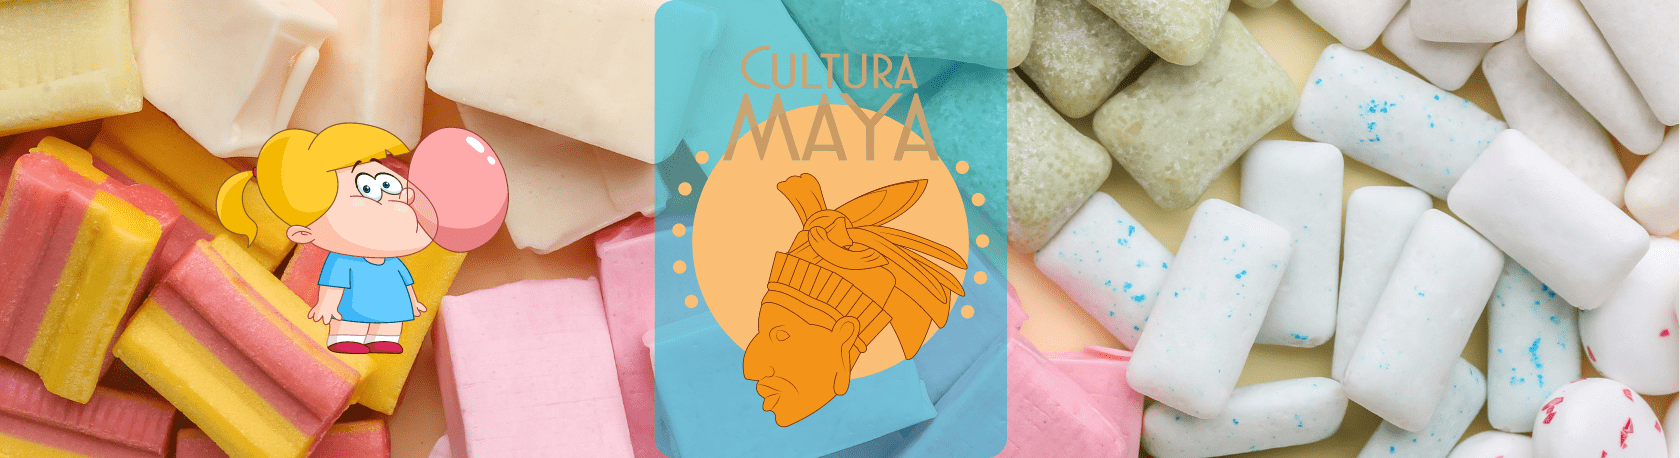 Practice Spanish while learning how the Maya people invented the chewing gum